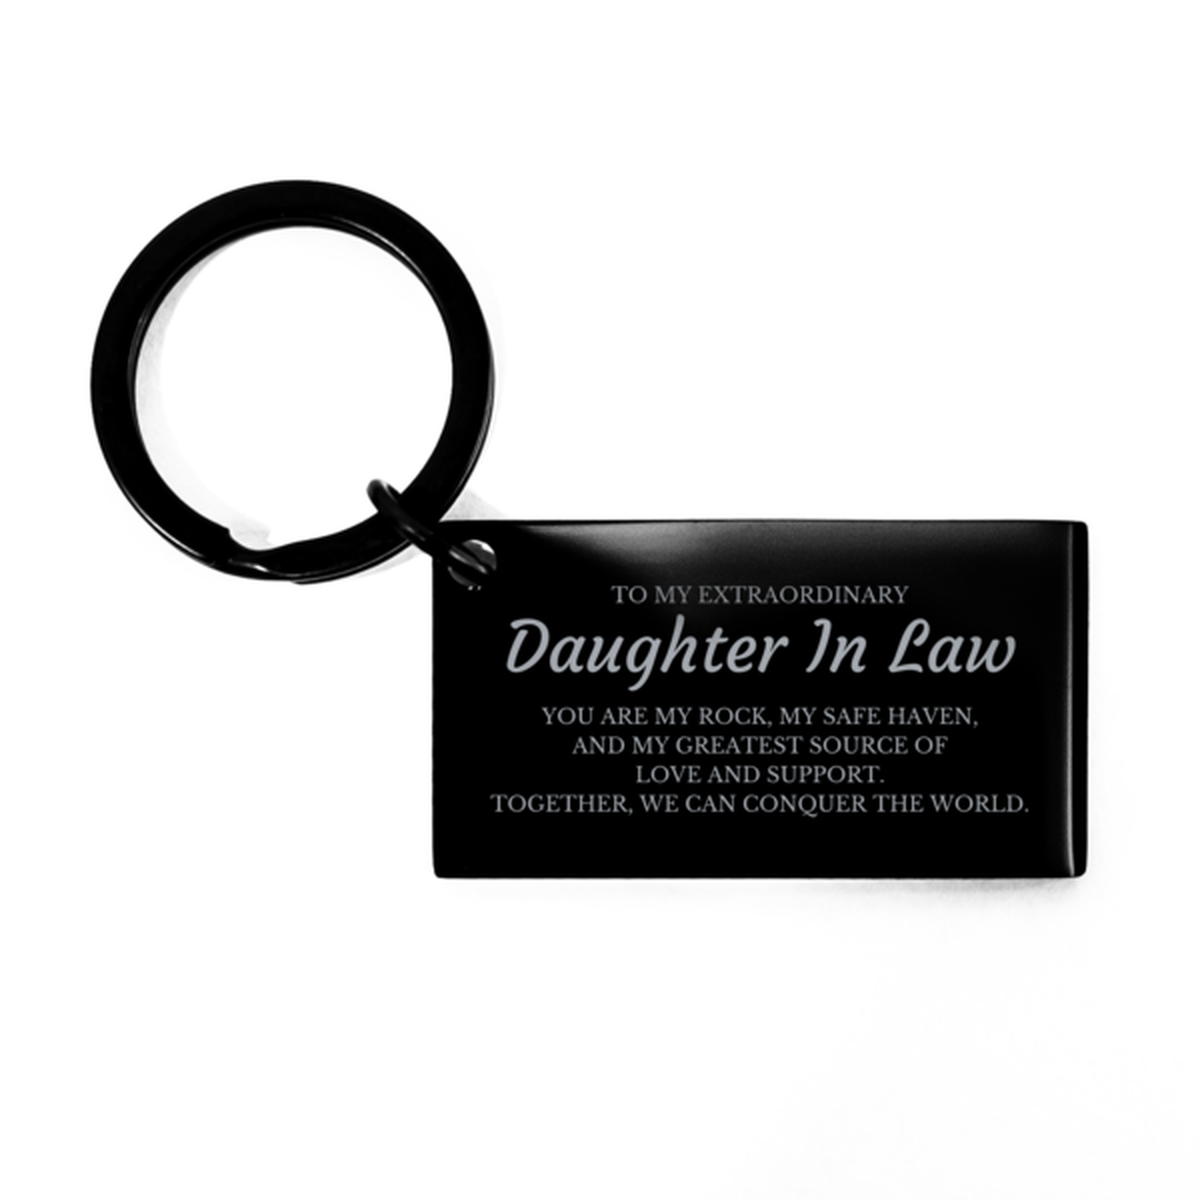 To My Extraordinary Daughter In Law Gifts, Together, we can conquer the world, Birthday Keychain For Daughter In Law, Christmas Gifts For Daughter In Law